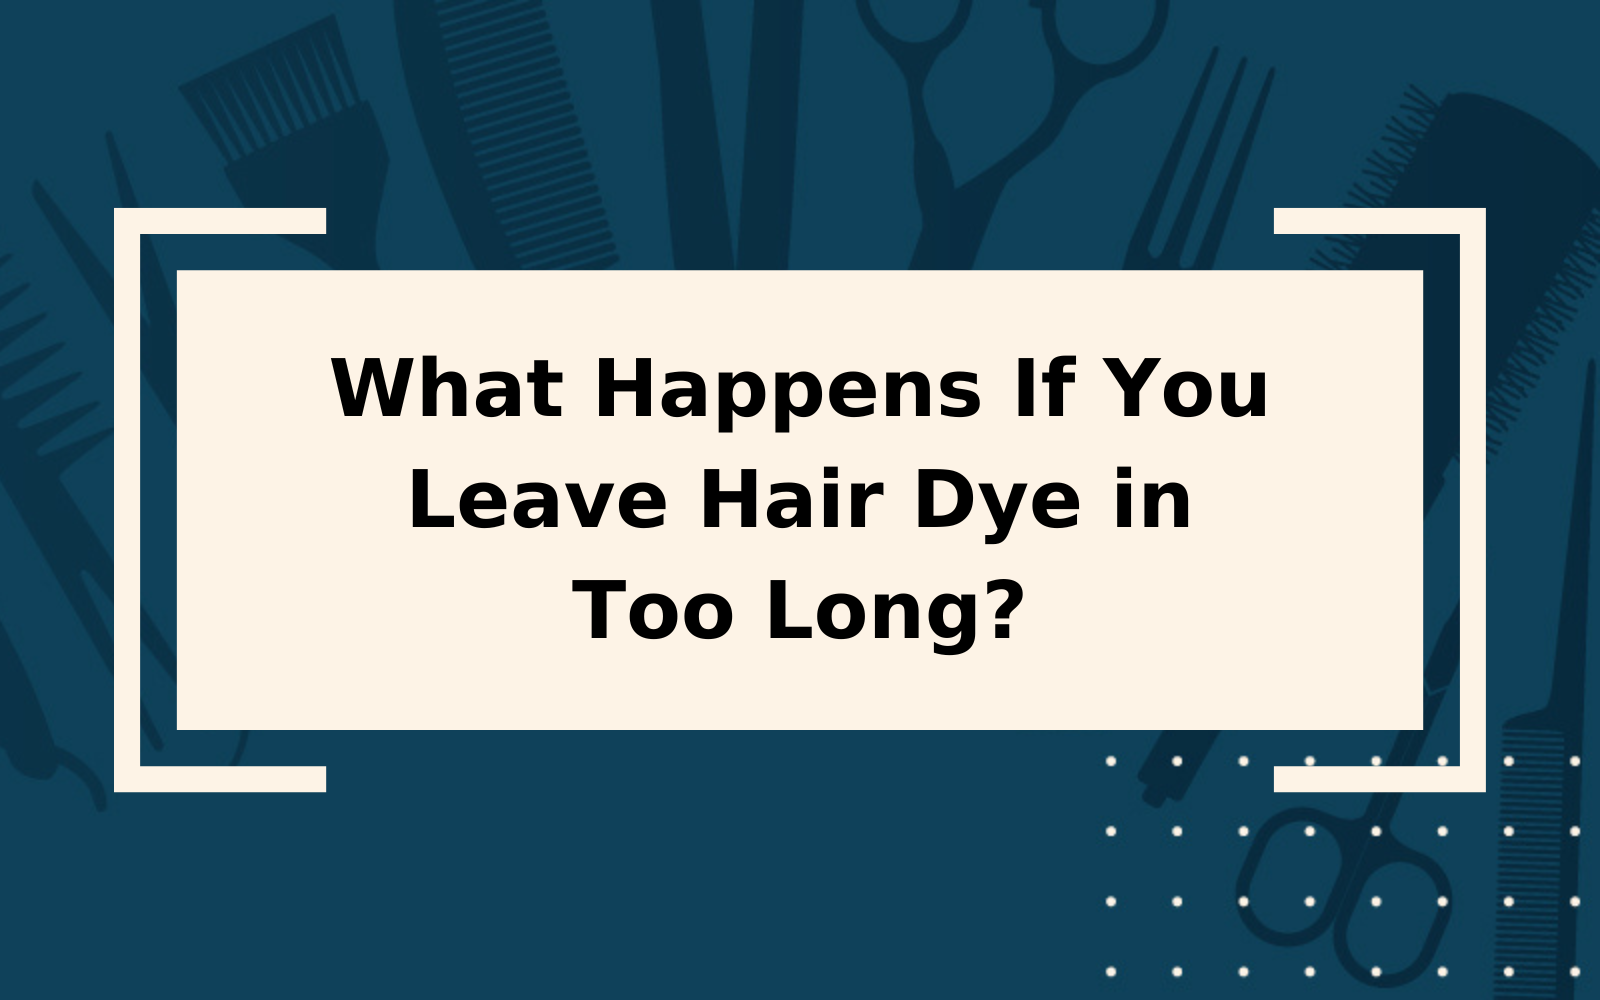 What Happens If You Leave Hair Dye in Too Long?